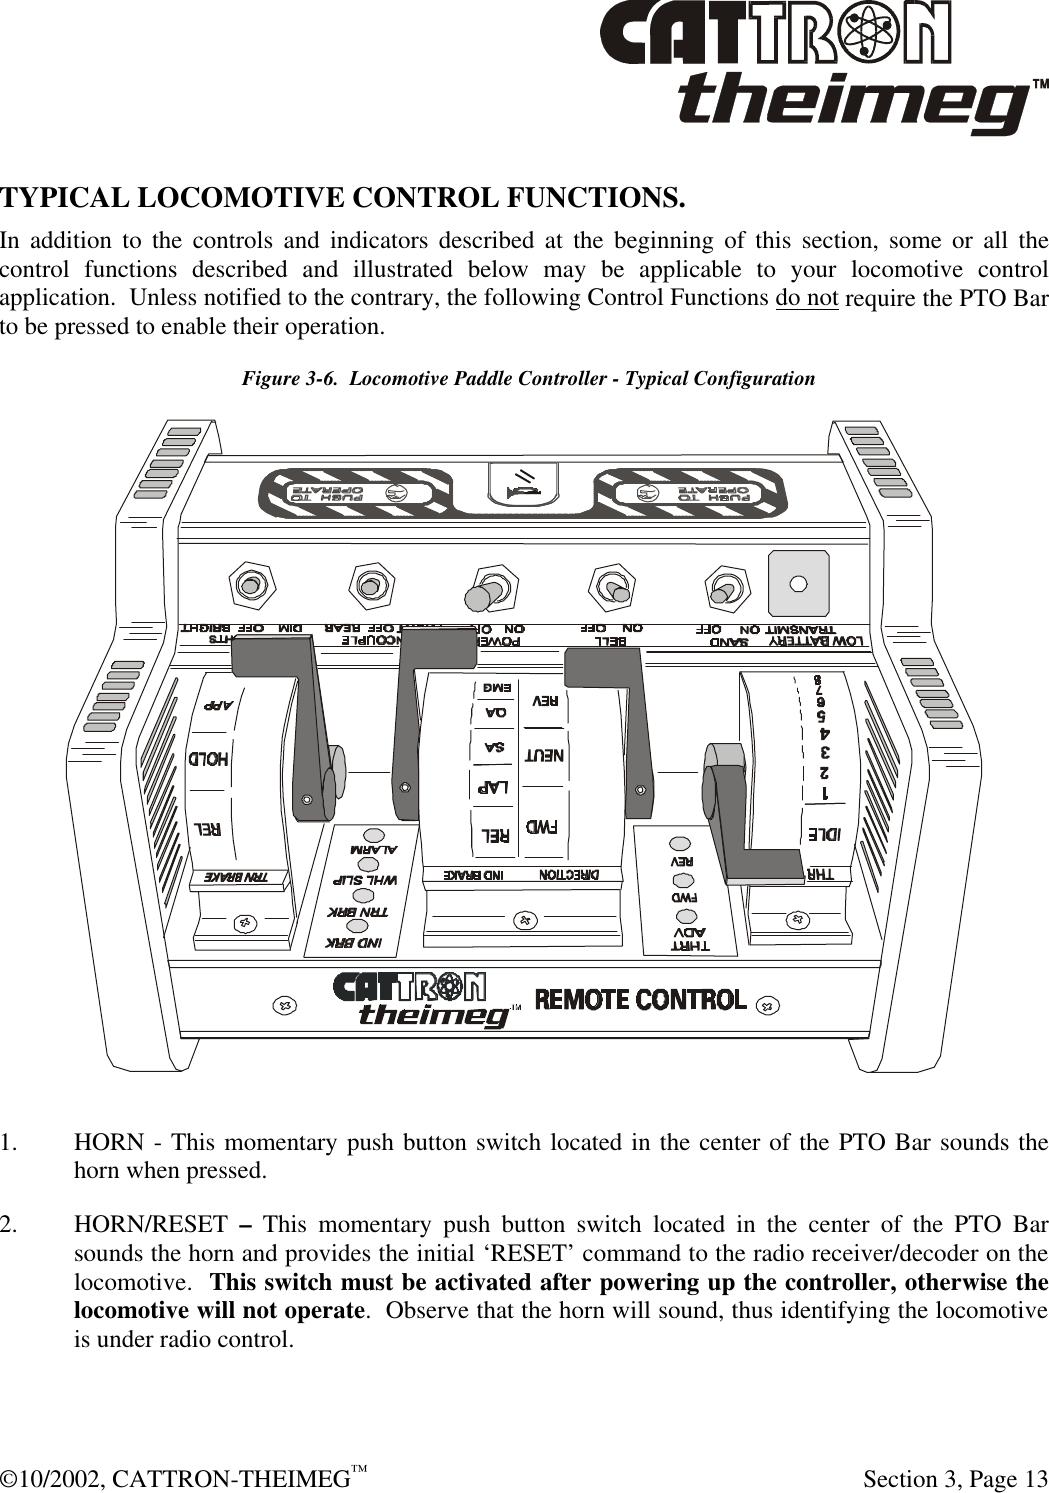  ©10/2002, CATTRON-THEIMEG™   Section 3, Page 13 TYPICAL LOCOMOTIVE CONTROL FUNCTIONS.  In addition to the controls and indicators described at the beginning of this section, some or all the control functions described and illustrated below may be applicable to your locomotive control application.  Unless notified to the contrary, the following Control Functions do not require the PTO Bar to be pressed to enable their operation.     Figure 3-6.  Locomotive Paddle Controller - Typical Configuration  1. HORN - This momentary push button switch located in the center of the PTO Bar sounds the horn when pressed. 2. HORN/RESET – This momentary push button switch located in the center of the PTO Bar sounds the horn and provides the initial ‘RESET’ command to the radio receiver/decoder on the locomotive.  This switch must be activated after powering up the controller, otherwise the locomotive will not operate.  Observe that the horn will sound, thus identifying the locomotive is under radio control. 